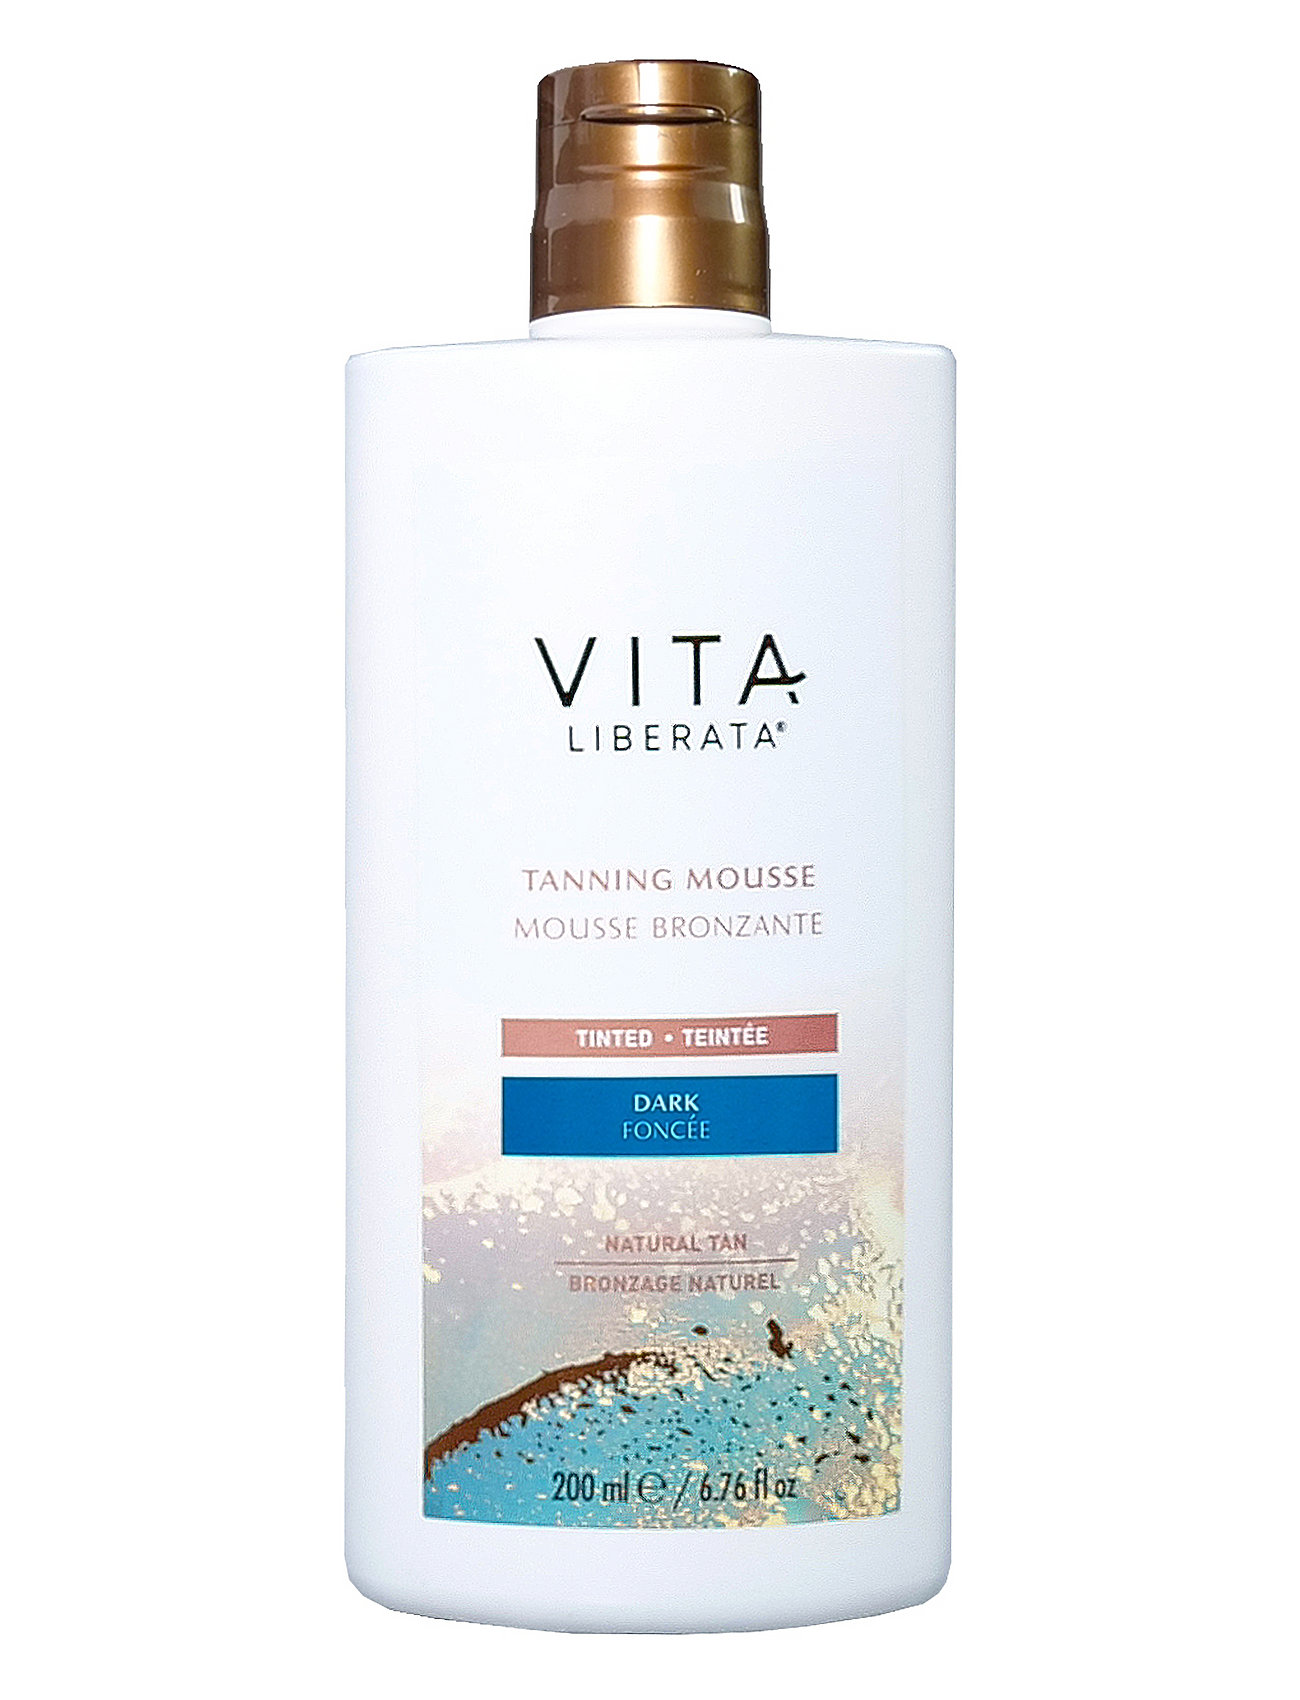 Tanning Mousse Beauty Women Skin Care Sun Products Self Tanners Mousse Nude Vita Liberata